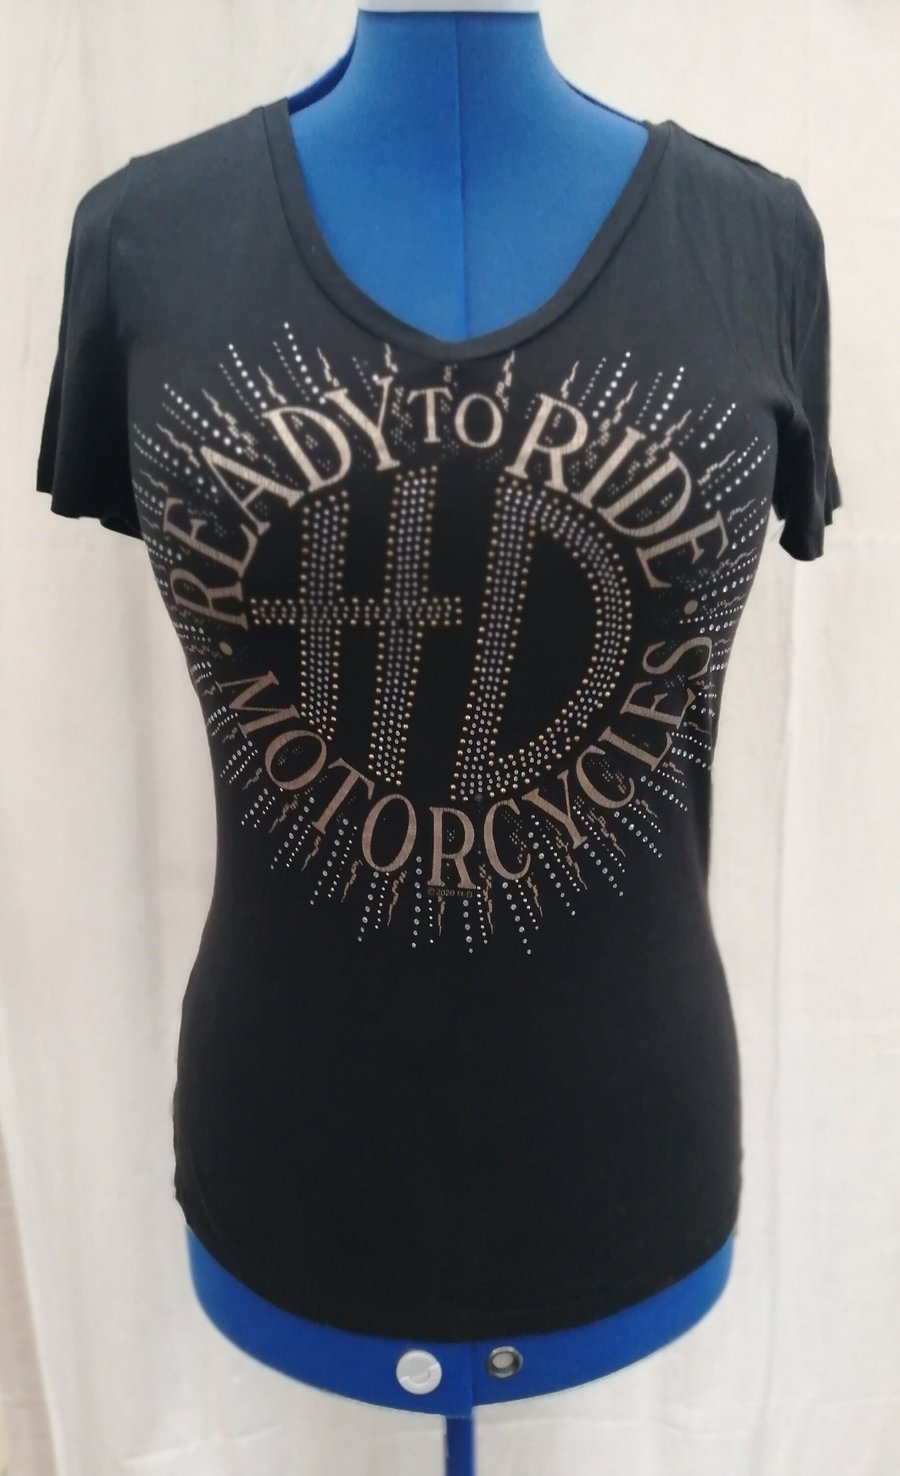 Vintage 2000's Harley Davidson Manchester - 'Ready To Ride' Top Tshirt size XS